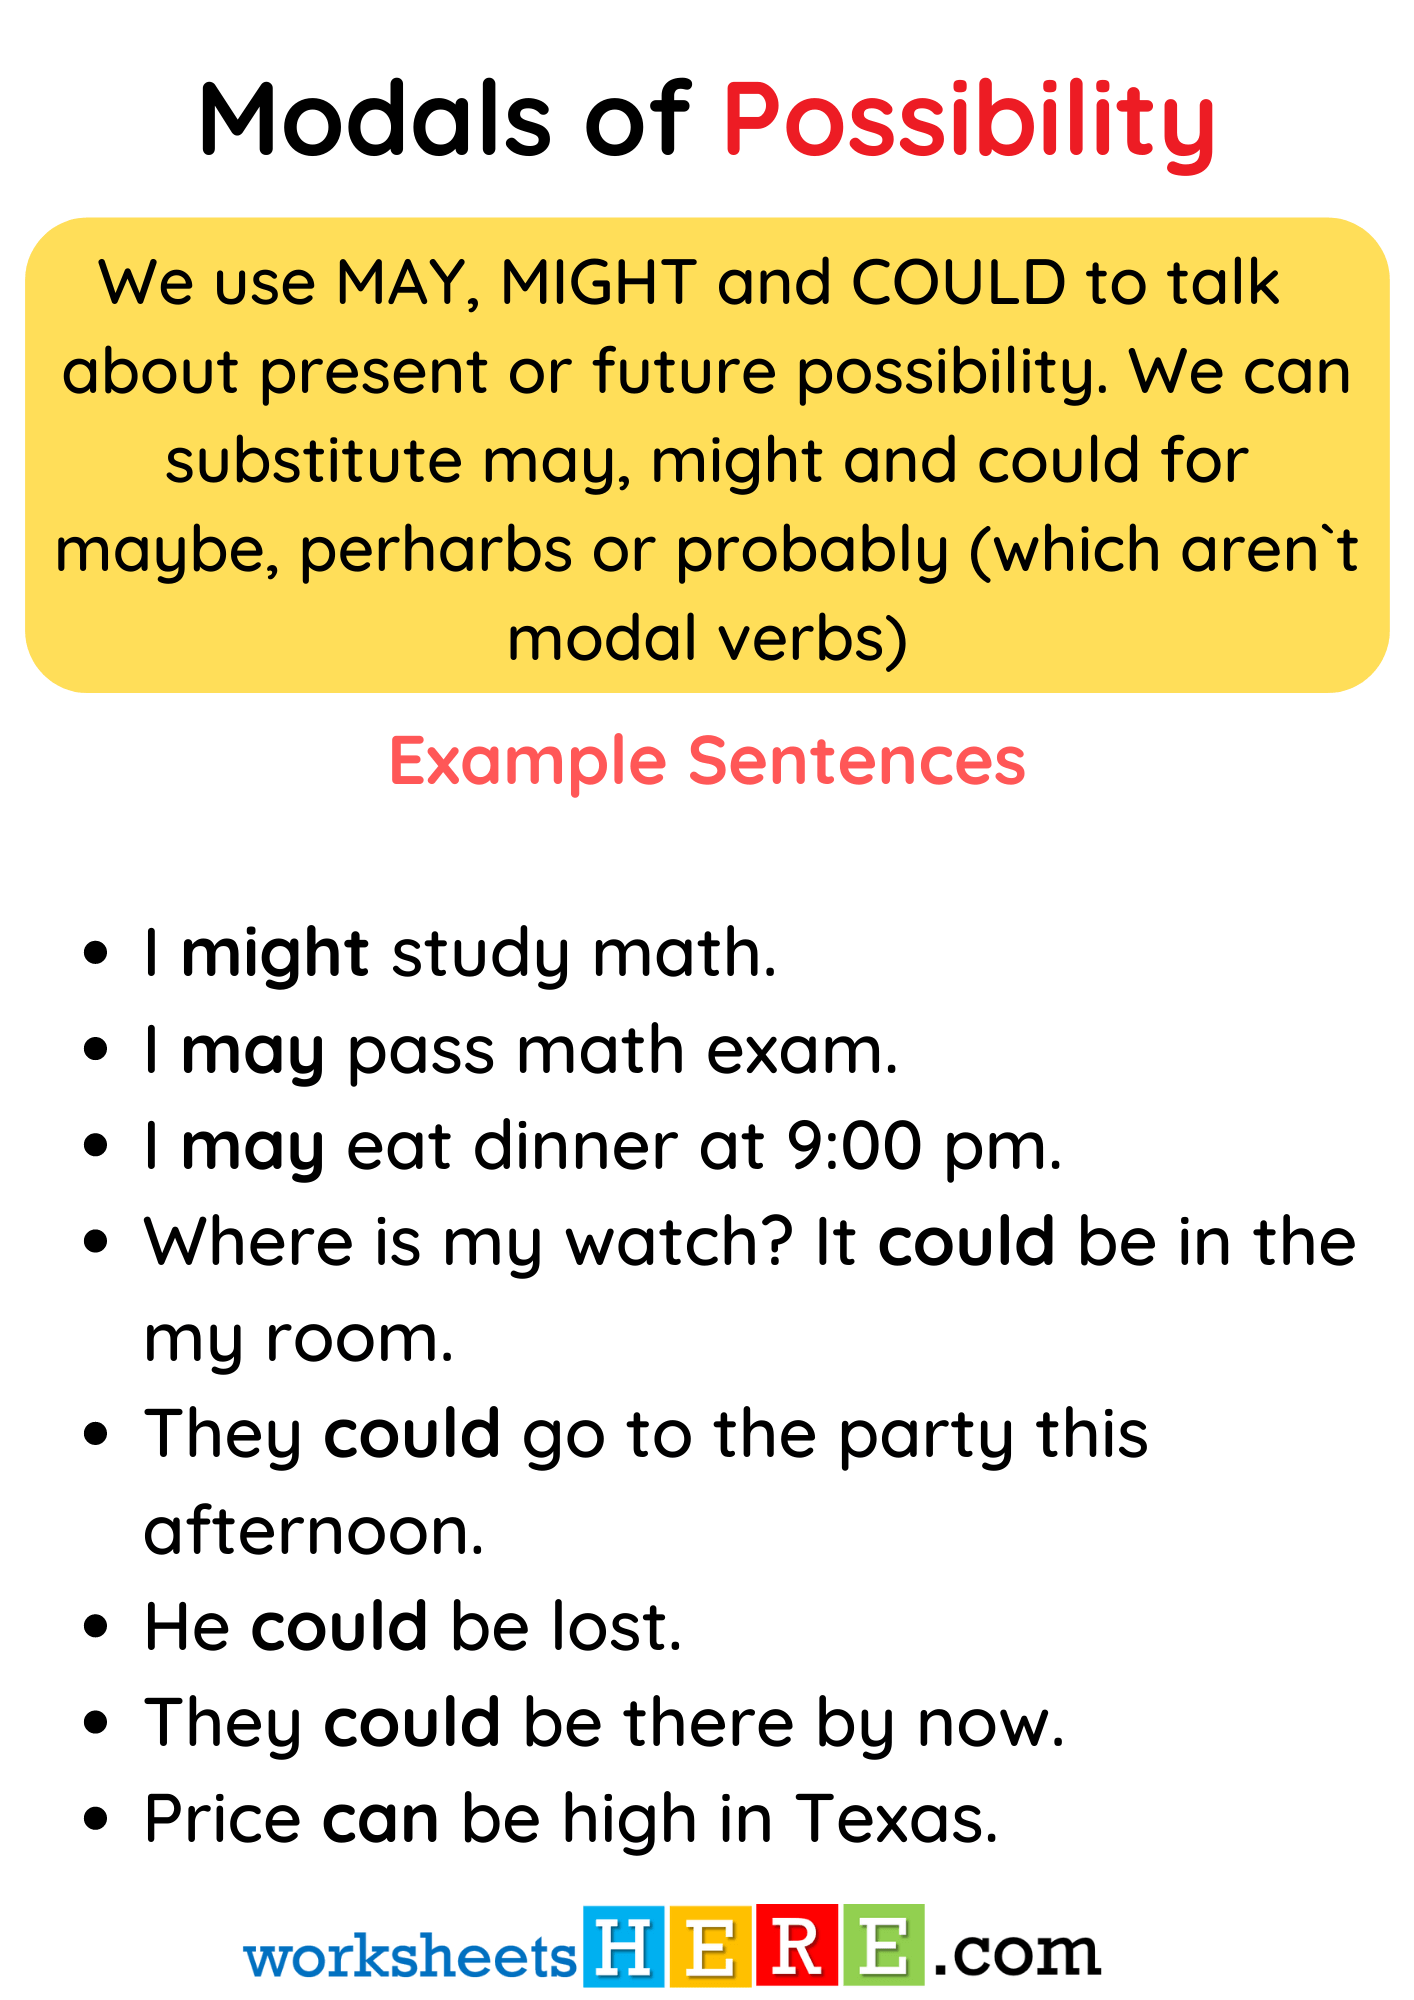 Modals of Possibility, Definition and Example Sentences PDF Worksheet For Kids and Students